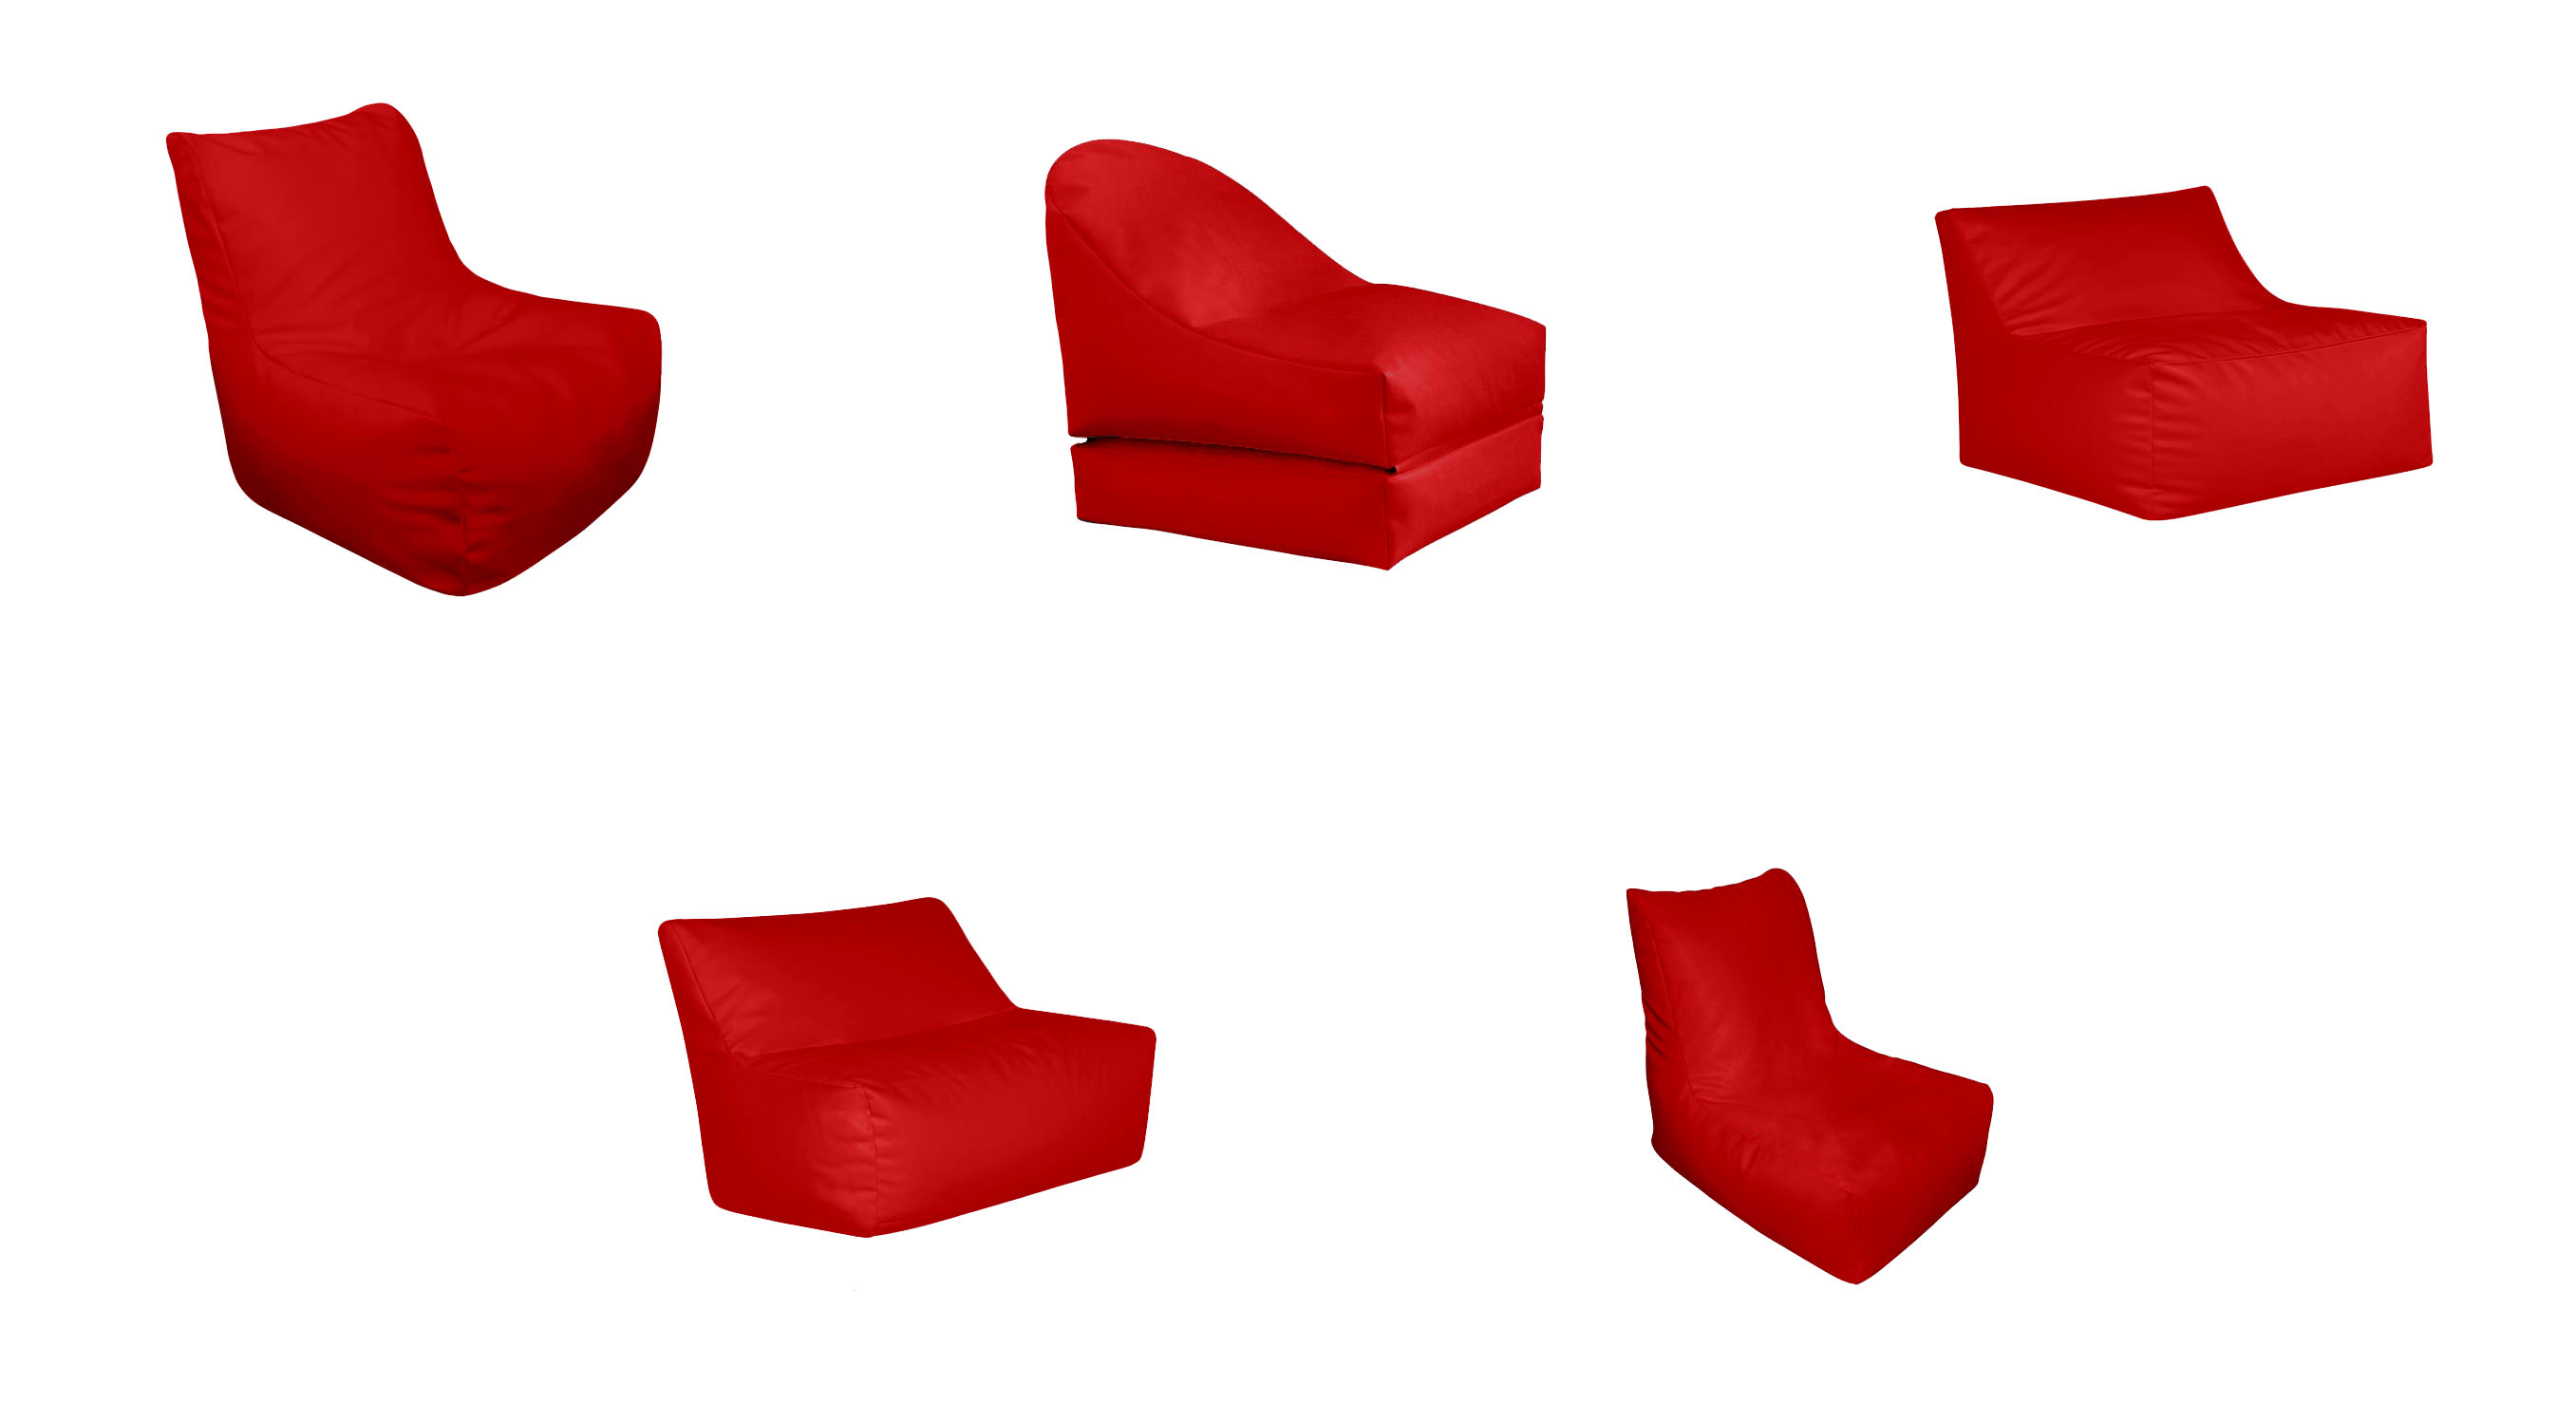 Bean bags designed as chairs